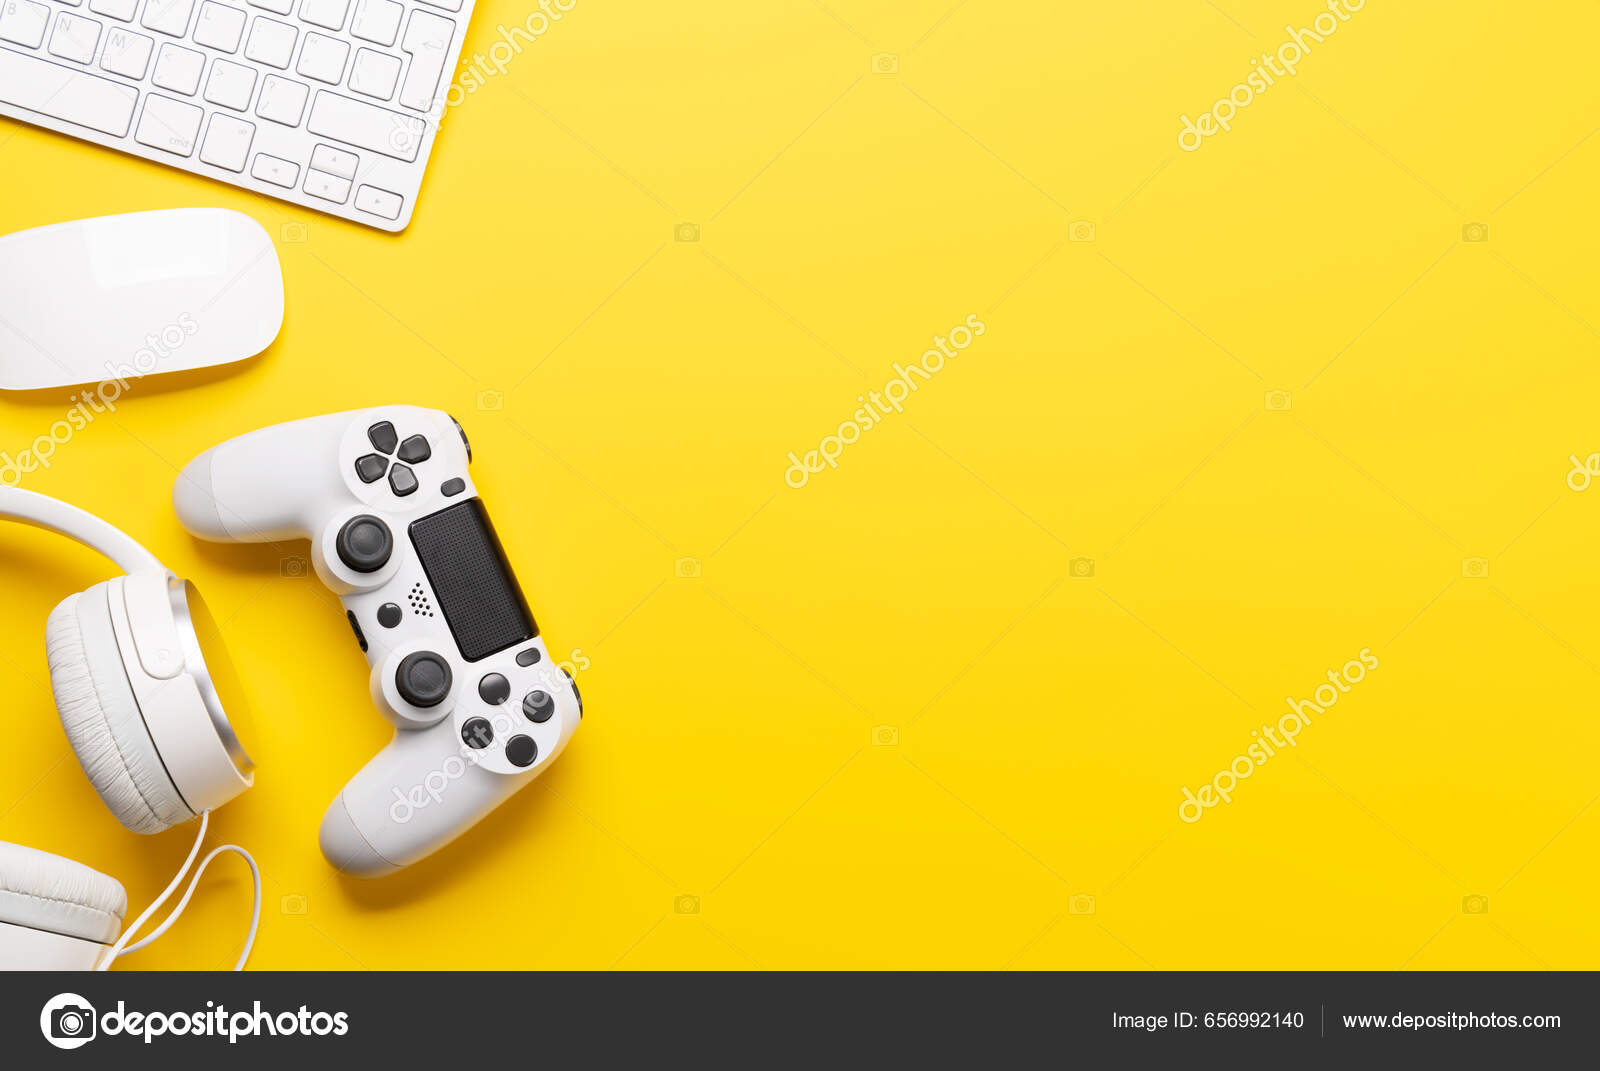 Gaming Gear Tech Accessories Yellow Background Perfect Gaming Tech Related  Stock Photo by ©karandaev 656992140